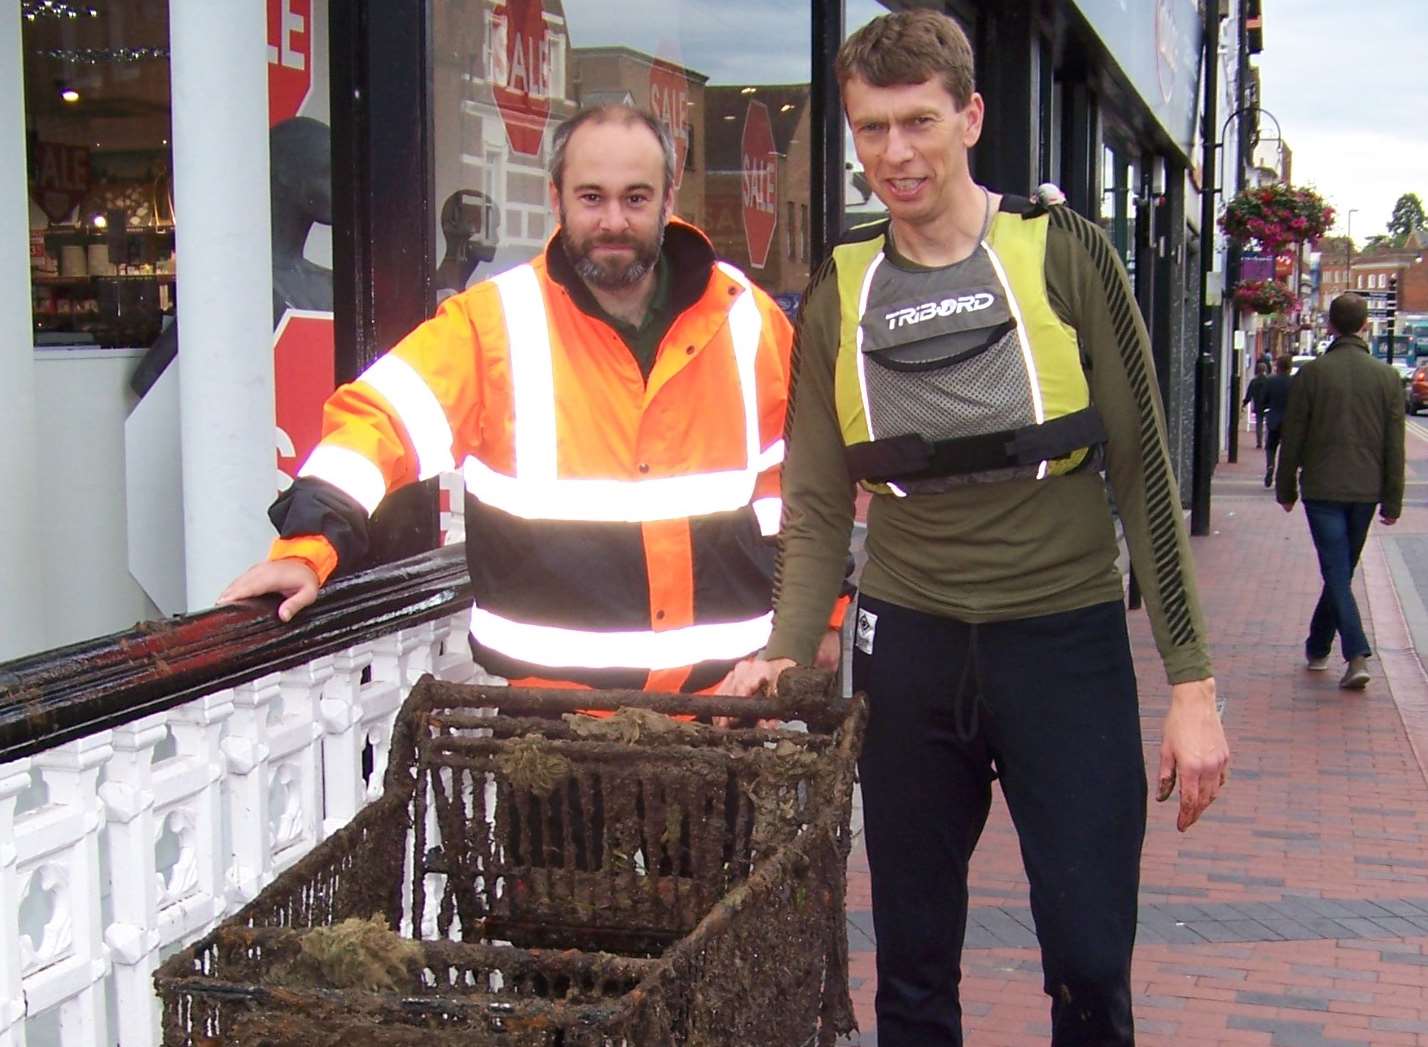 Tonbridge Flood Warden Coordinator, Carl Lewis (left) with Chair of Tonbridge Canoe Club, Clive Neale with one of the 15 dredged trolleys taken from the River Medway